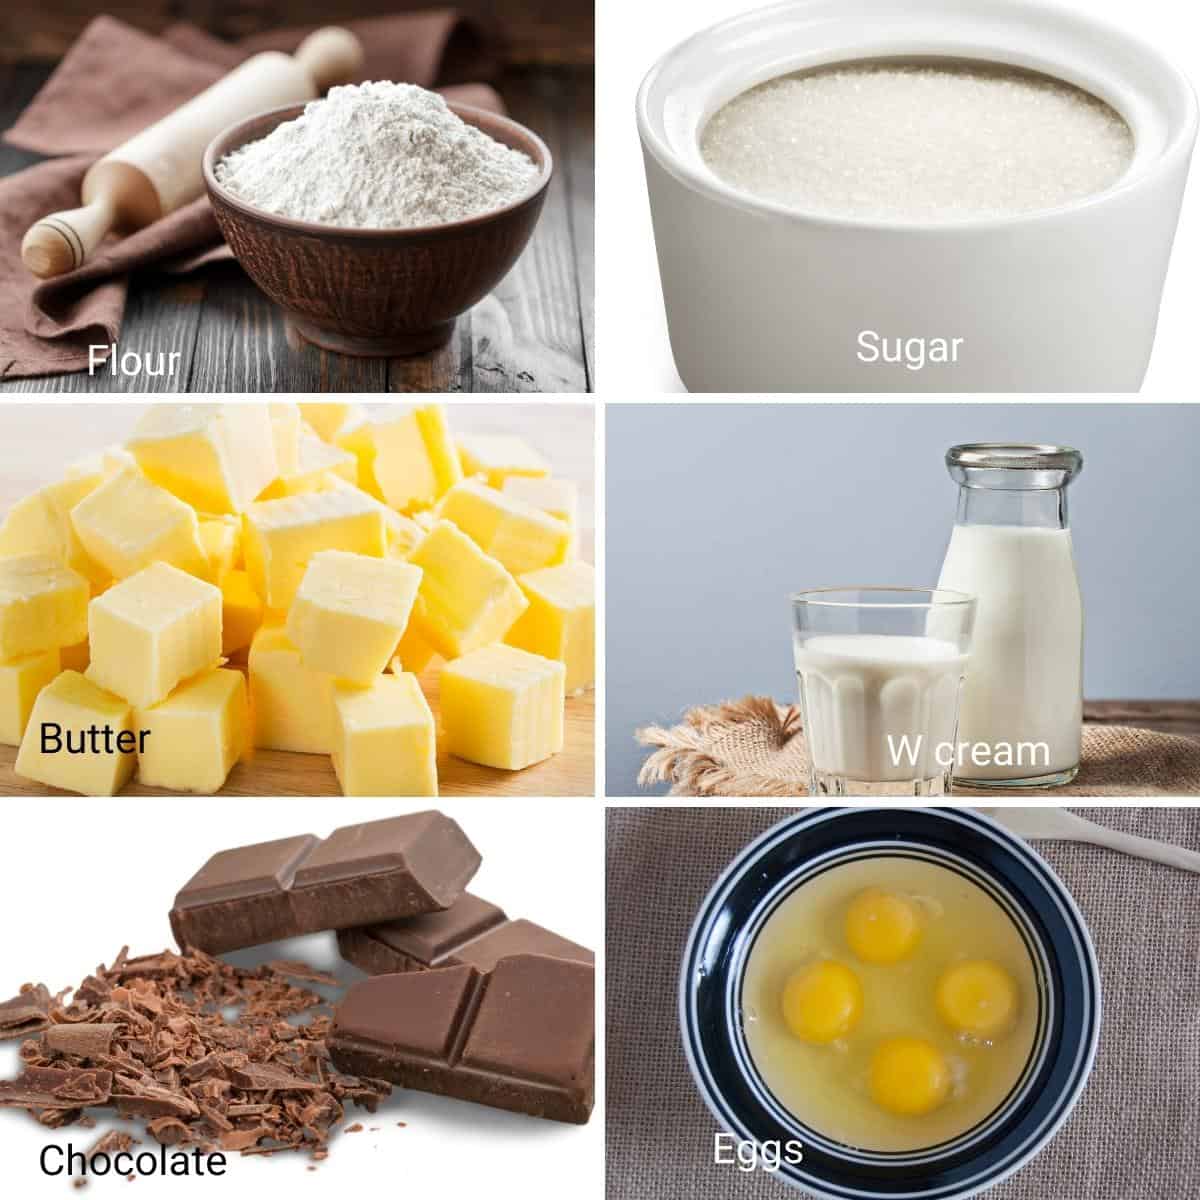 Ingredients shot collage for chocolate cake flourless.